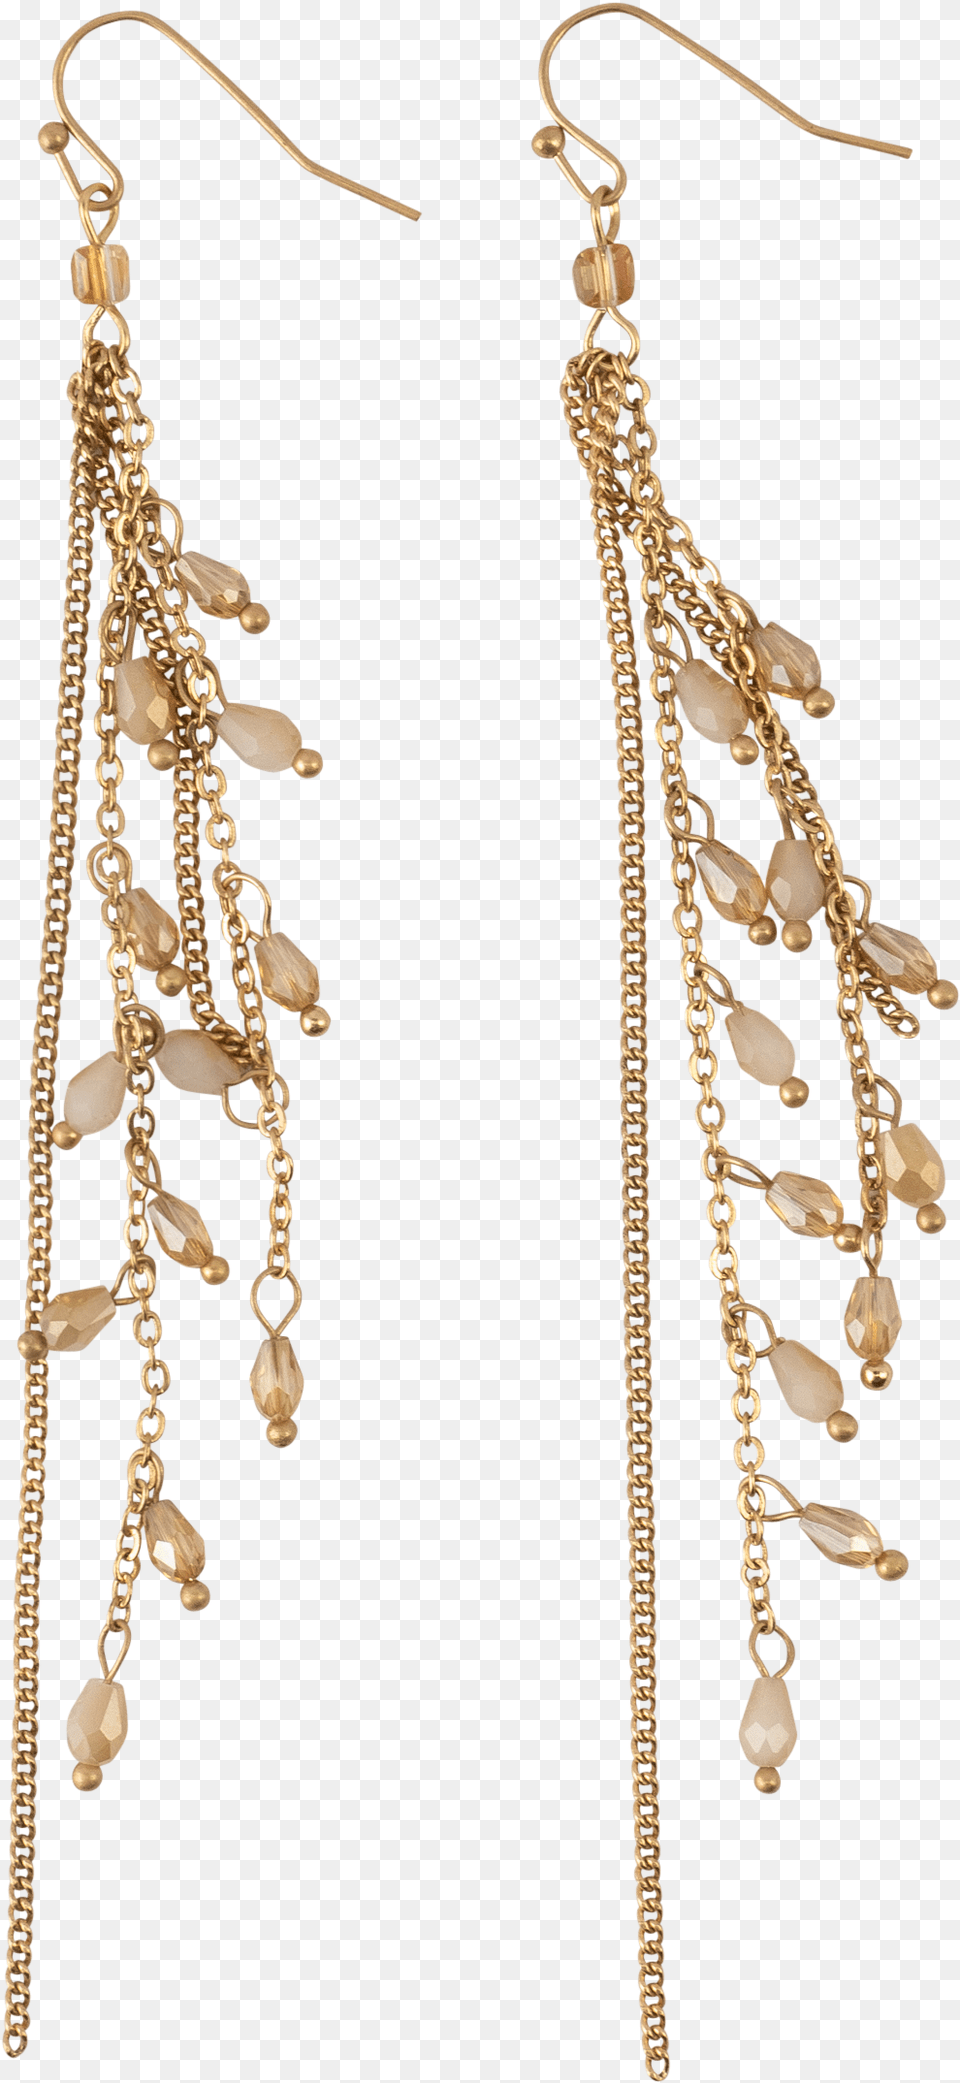 Long Gold Chains With Champagne Crystal Earrings Earrings, Accessories, Earring, Jewelry, Necklace Png